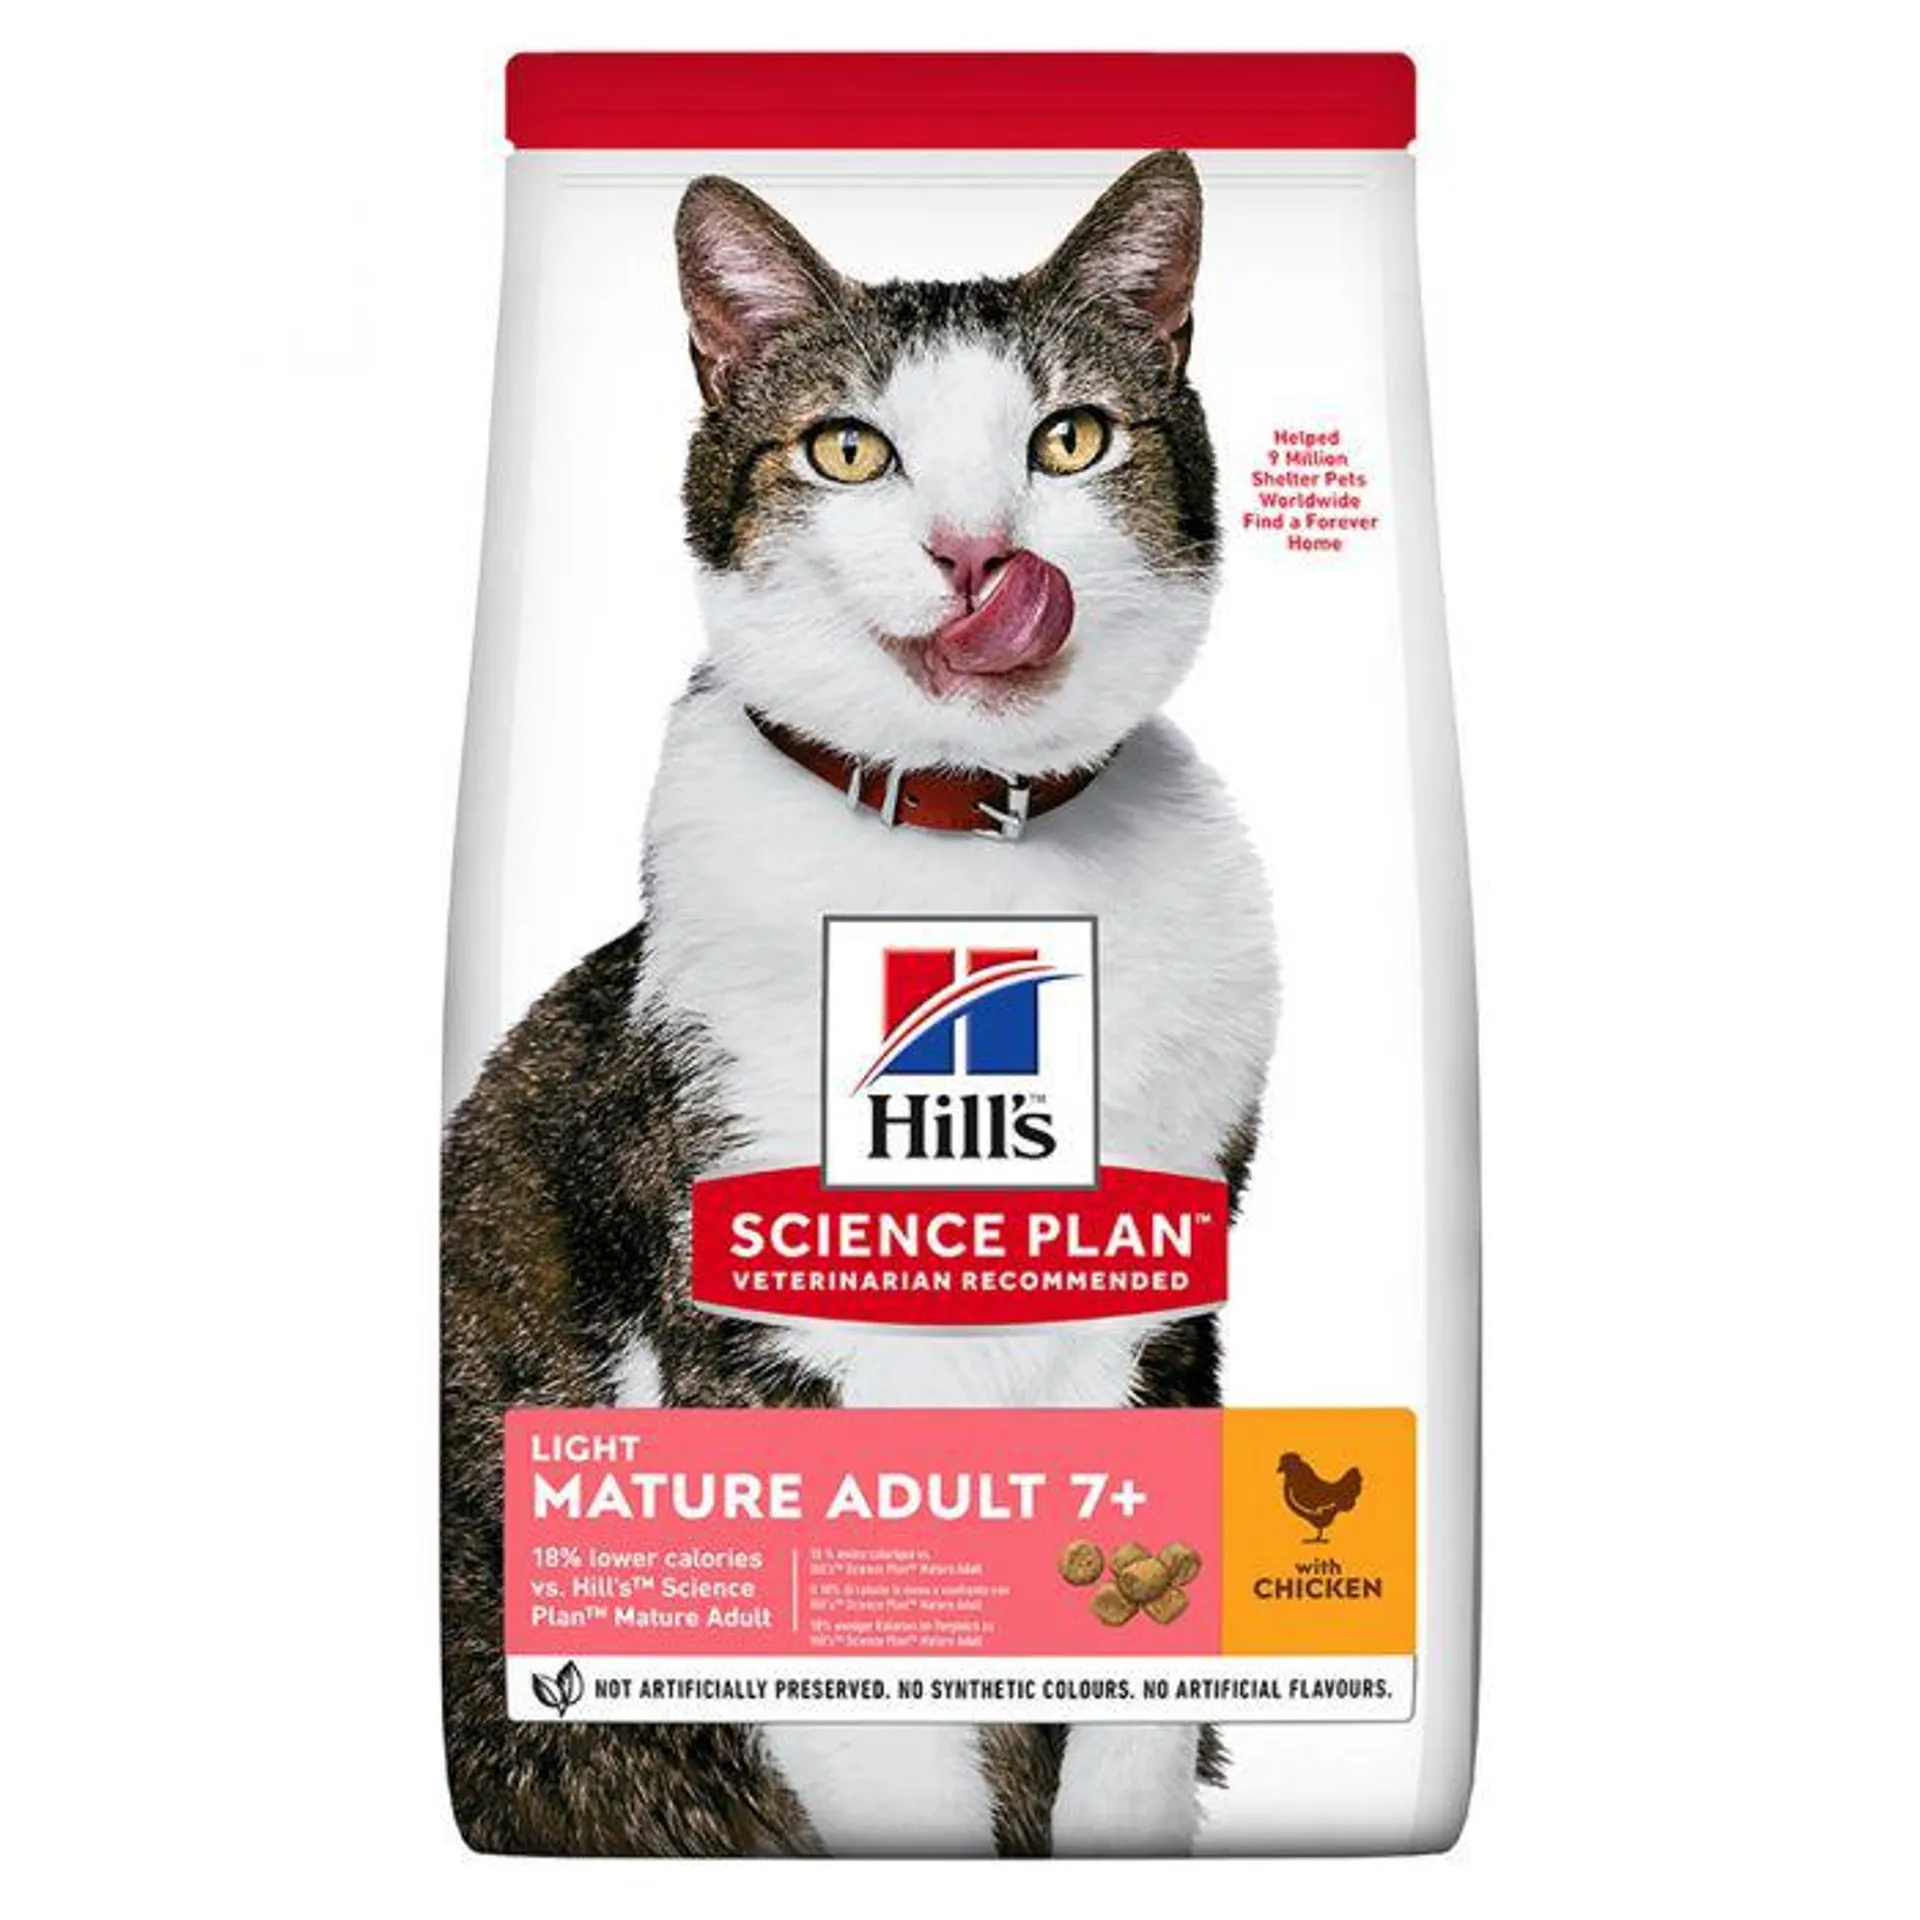 Hills Science Plan Light Mature Adult Cat Food with Chicken 1.5kg